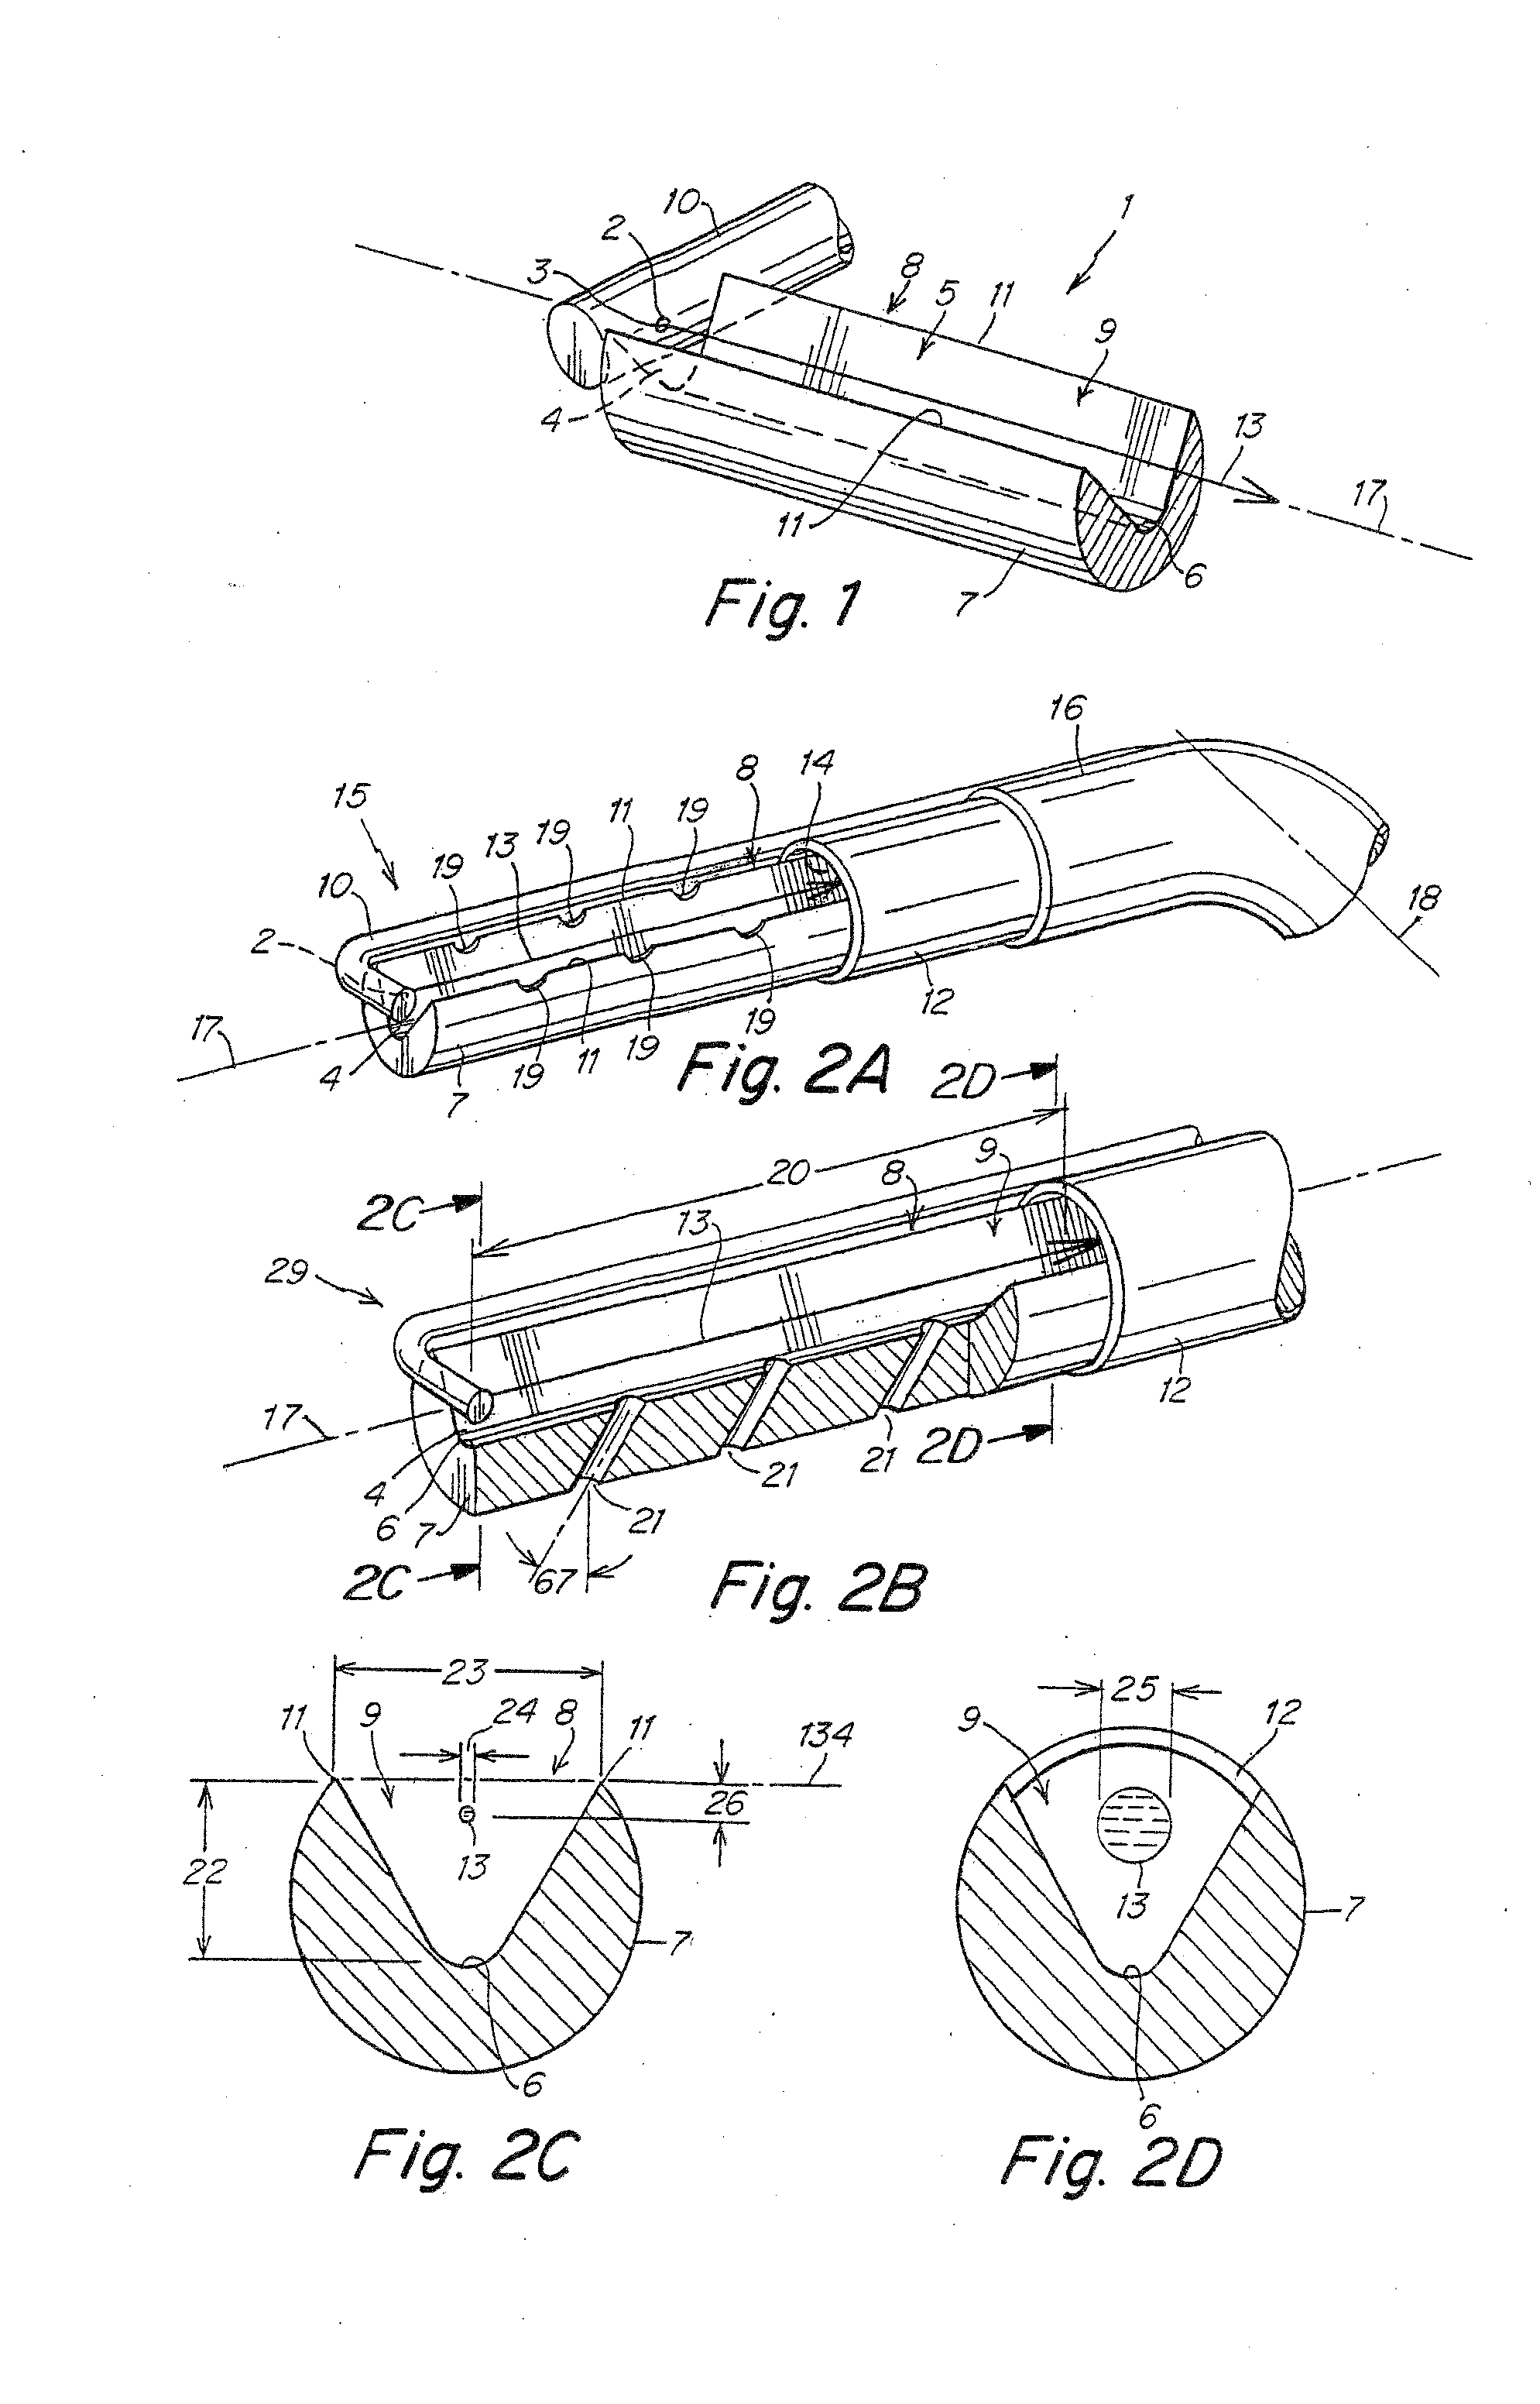 Liquid jet surgical instruments incorporating channel openings aligned along the jet beam